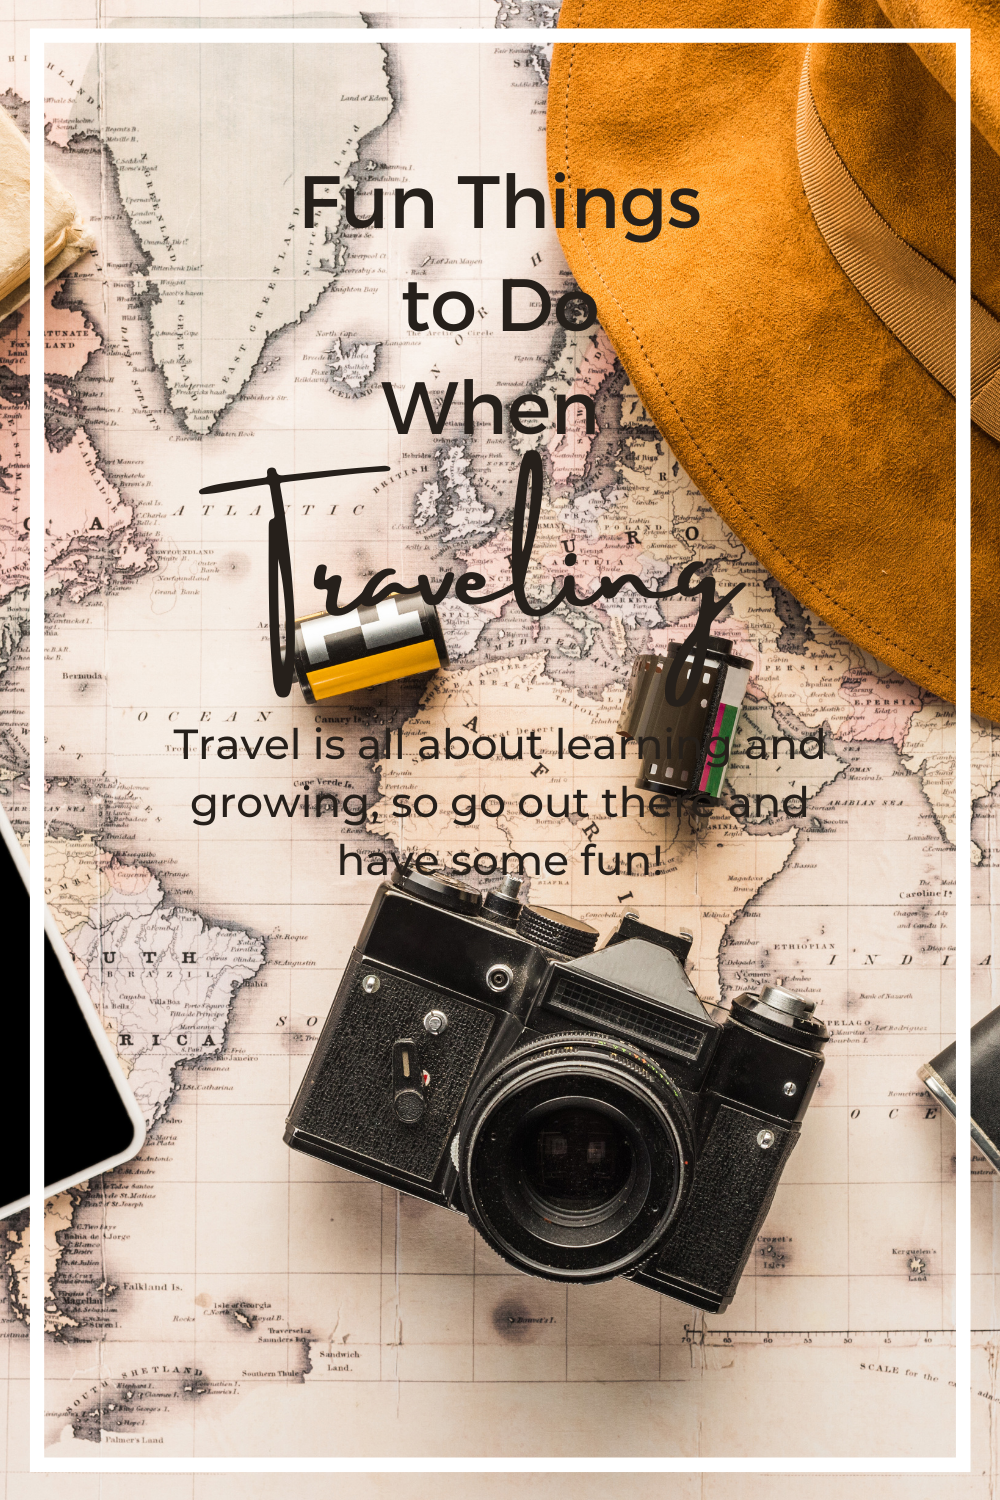 Fun Things to Do while Traveling